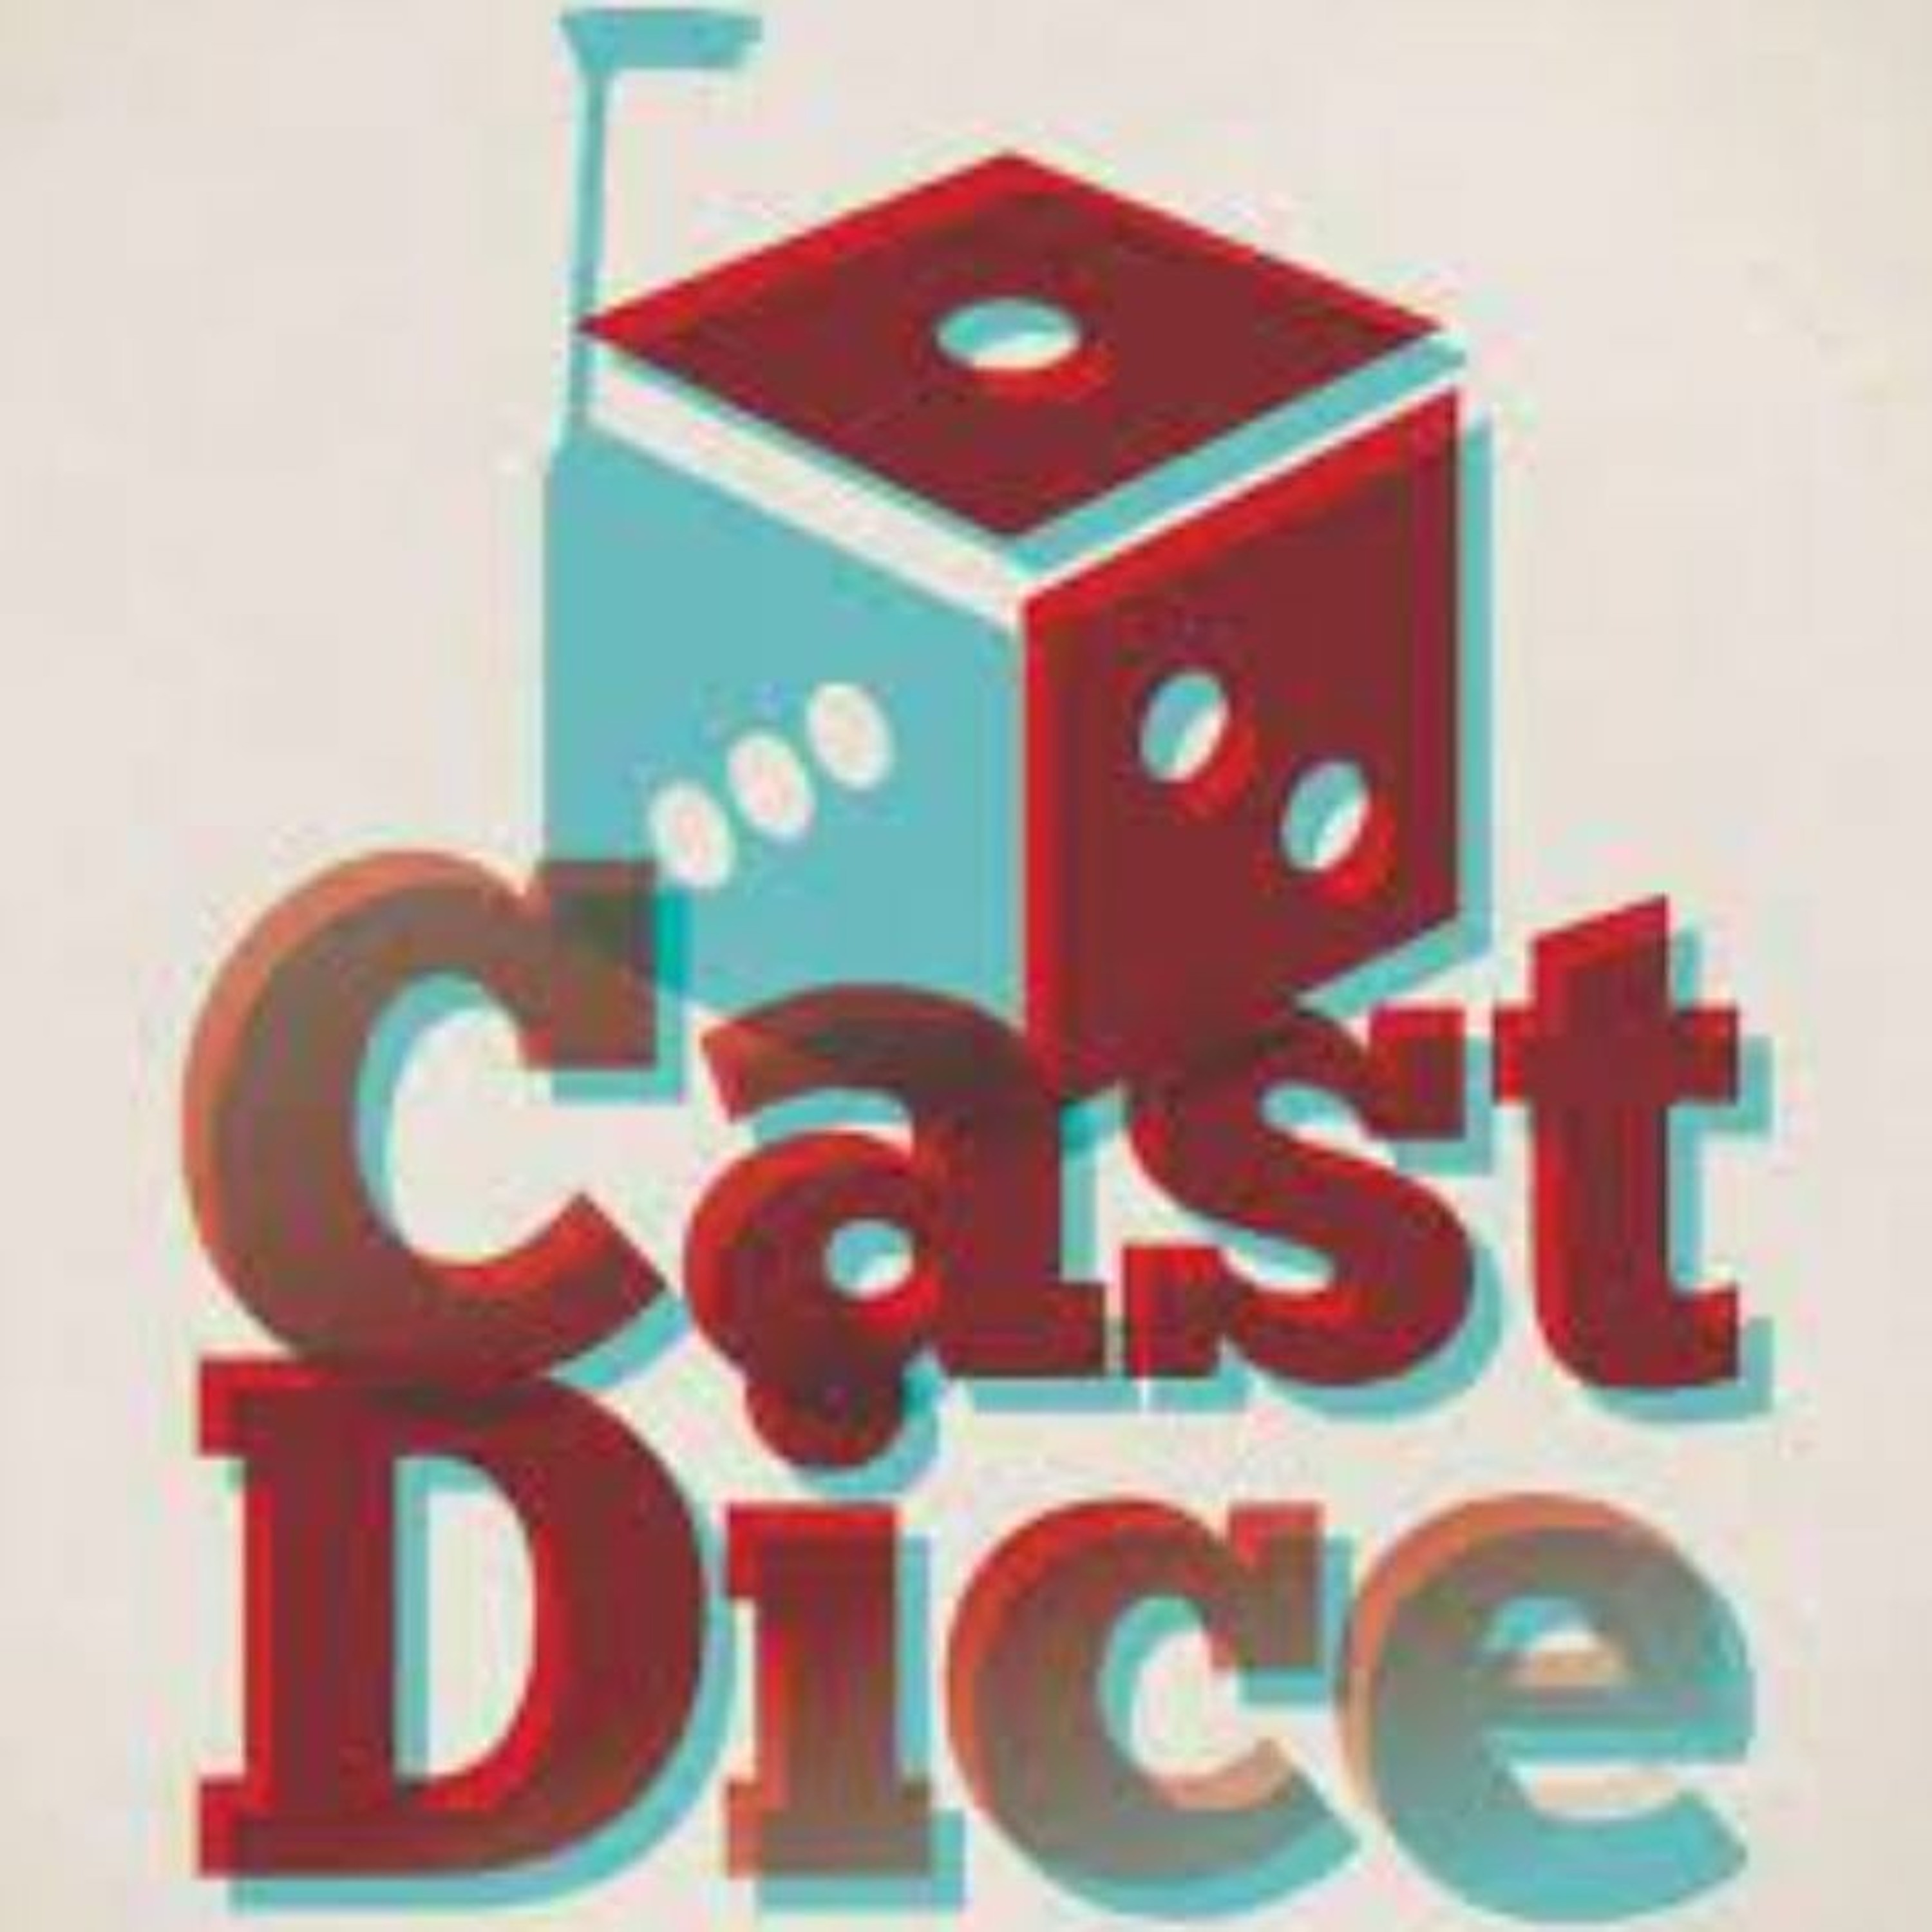 The Cast Dice Podcast - Ep 203 - Is Bolt Action Stale & The Cancon BA Event